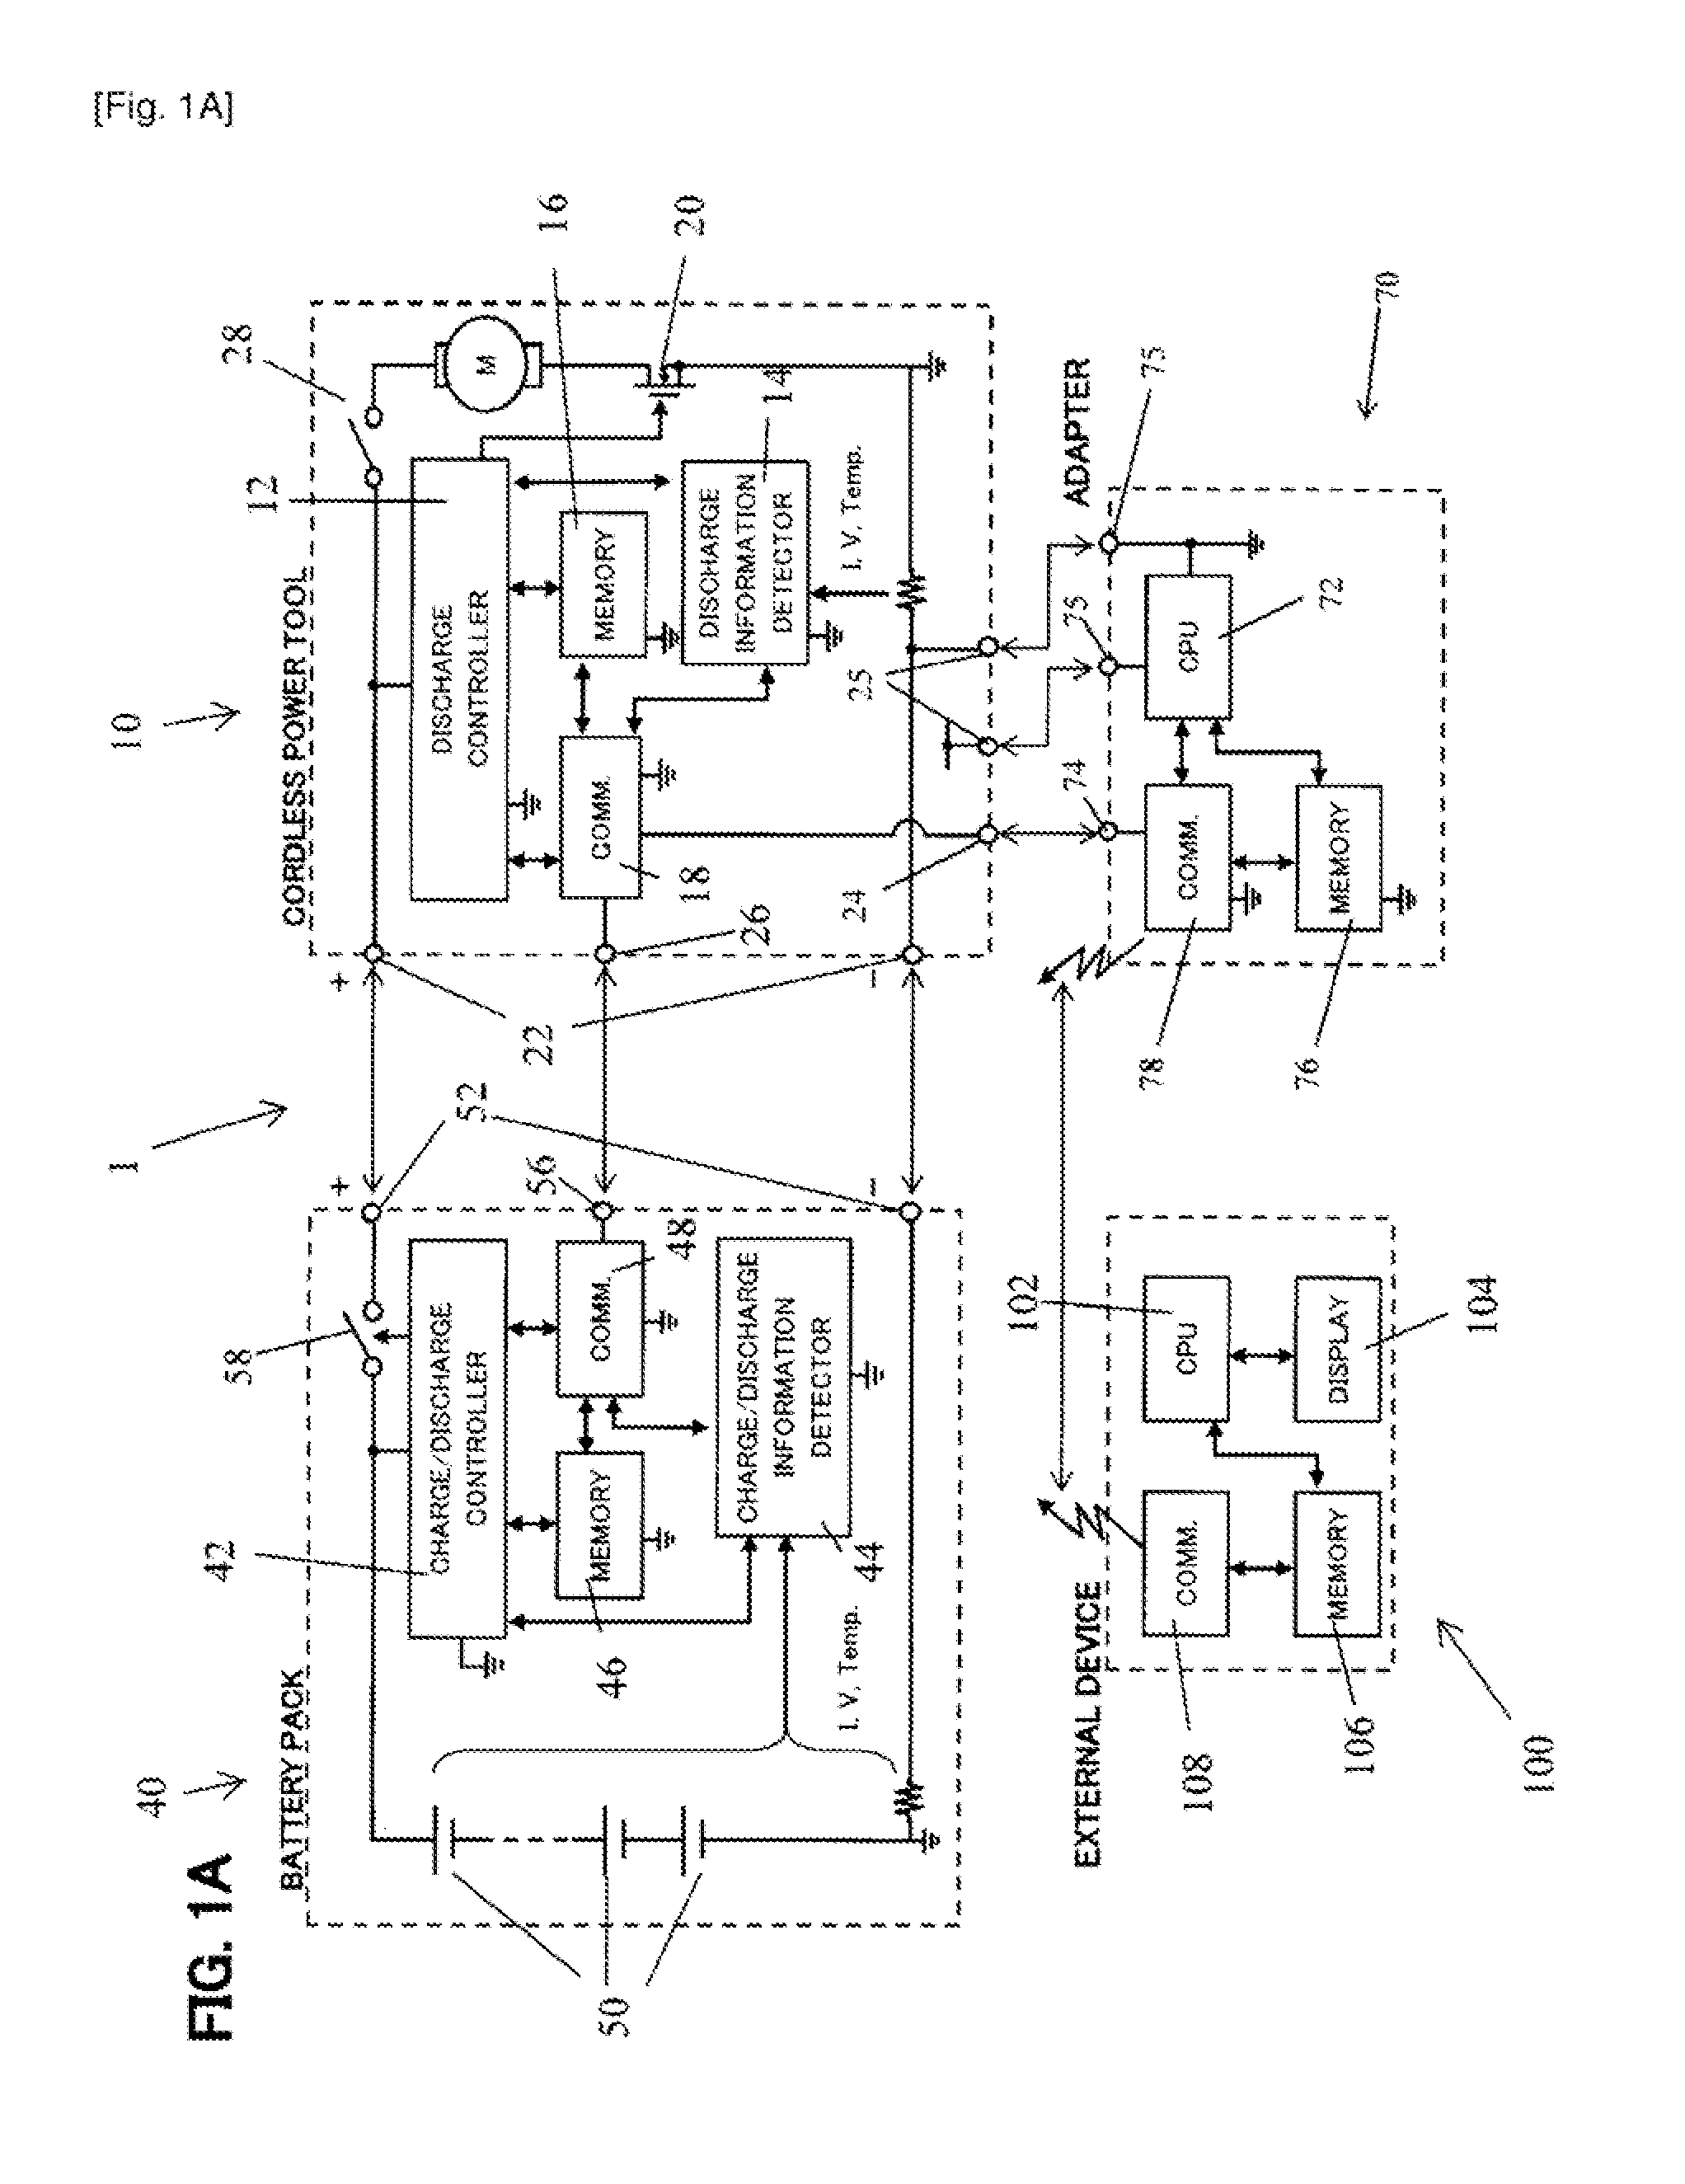 Adapter for Power Tools, Power Tool System and Method of Operating the Same